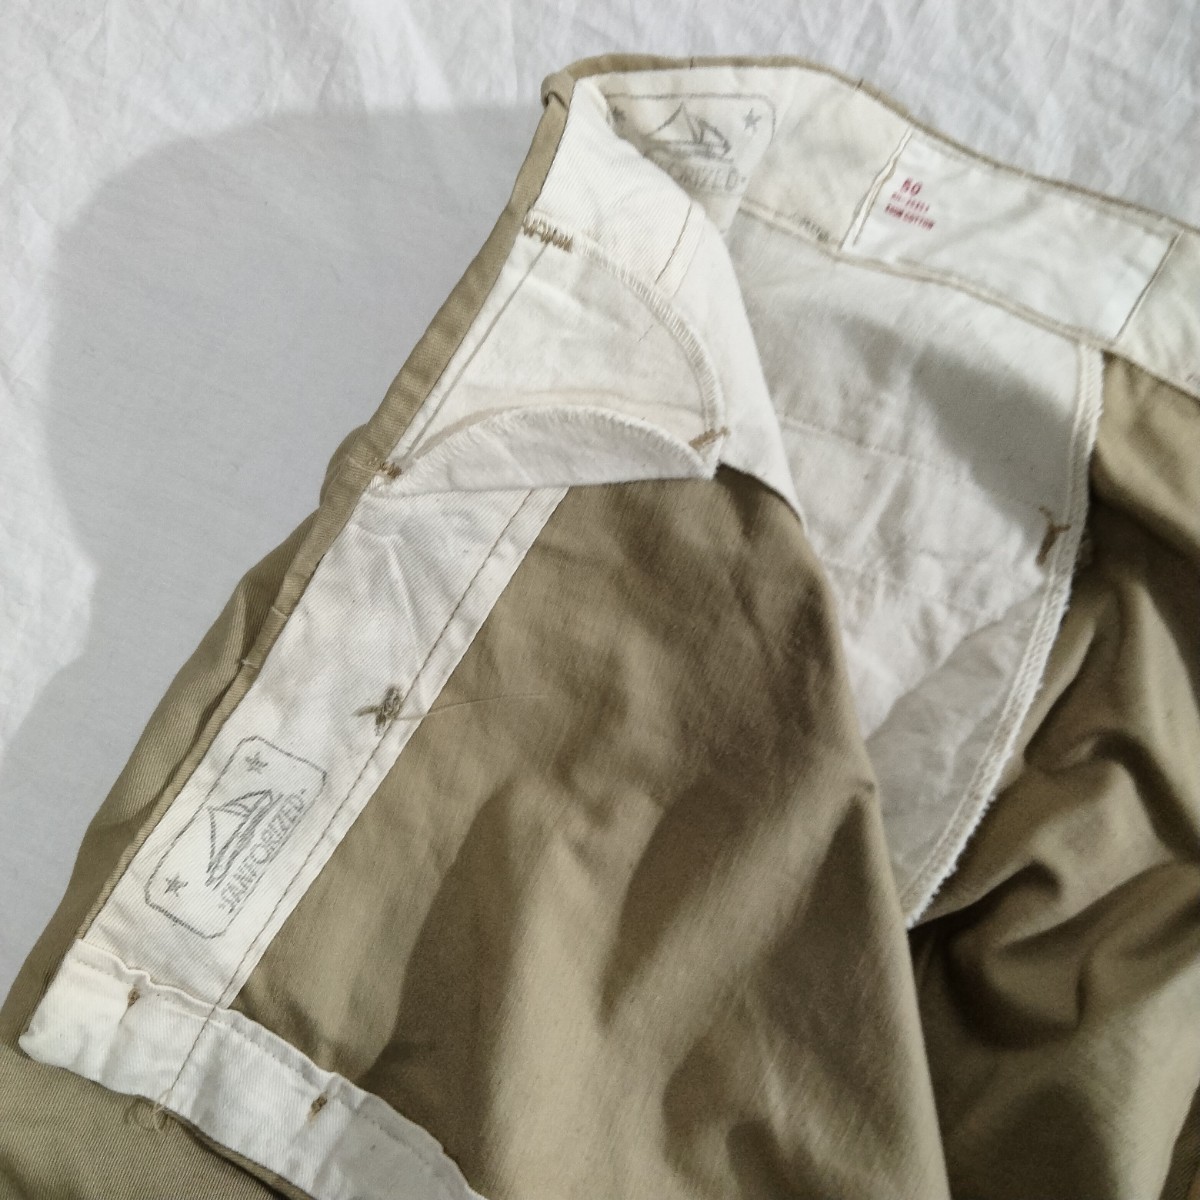 pacific overall Pacific overall button fly cotton chino trousers chinos Vintage vintage big 